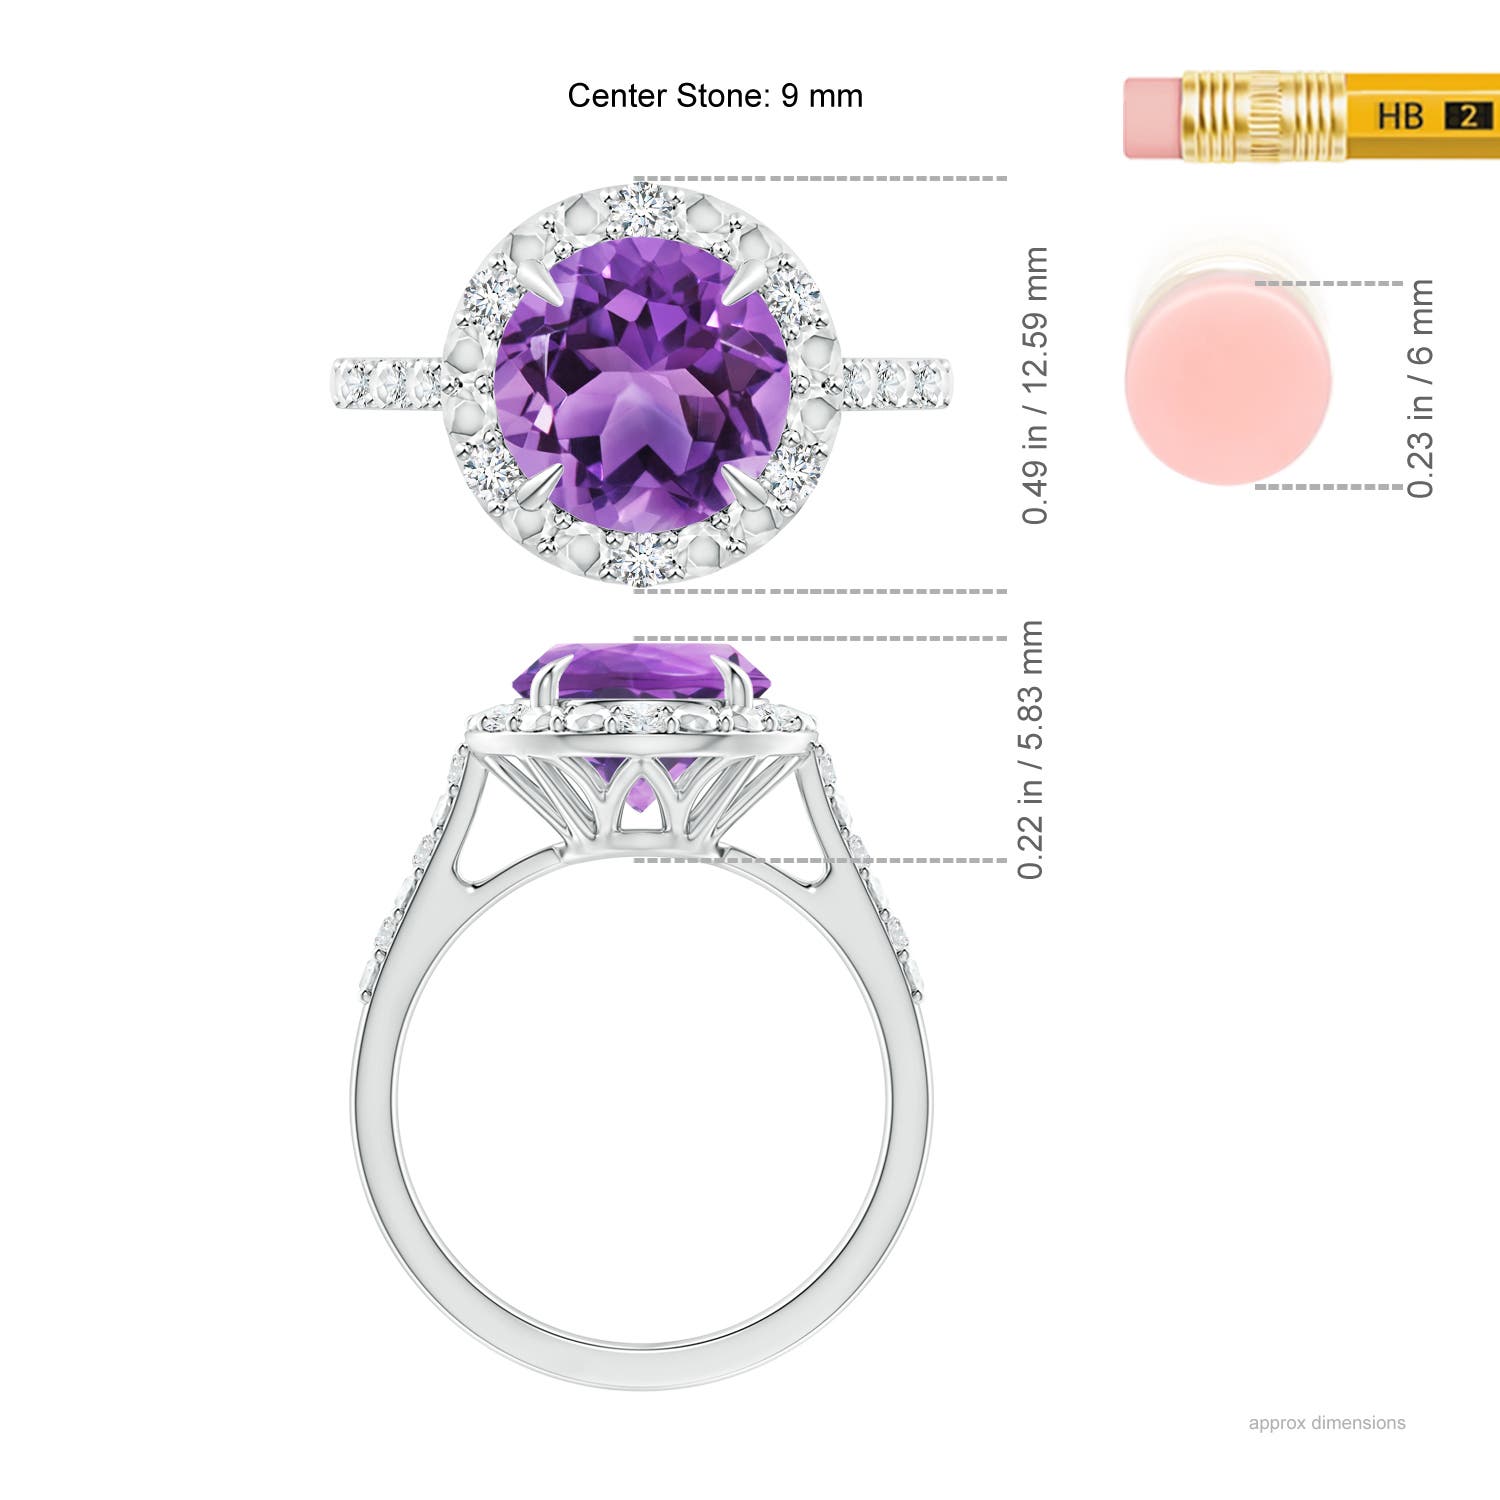 AA - Amethyst / 2.61 CT / 14 KT White Gold